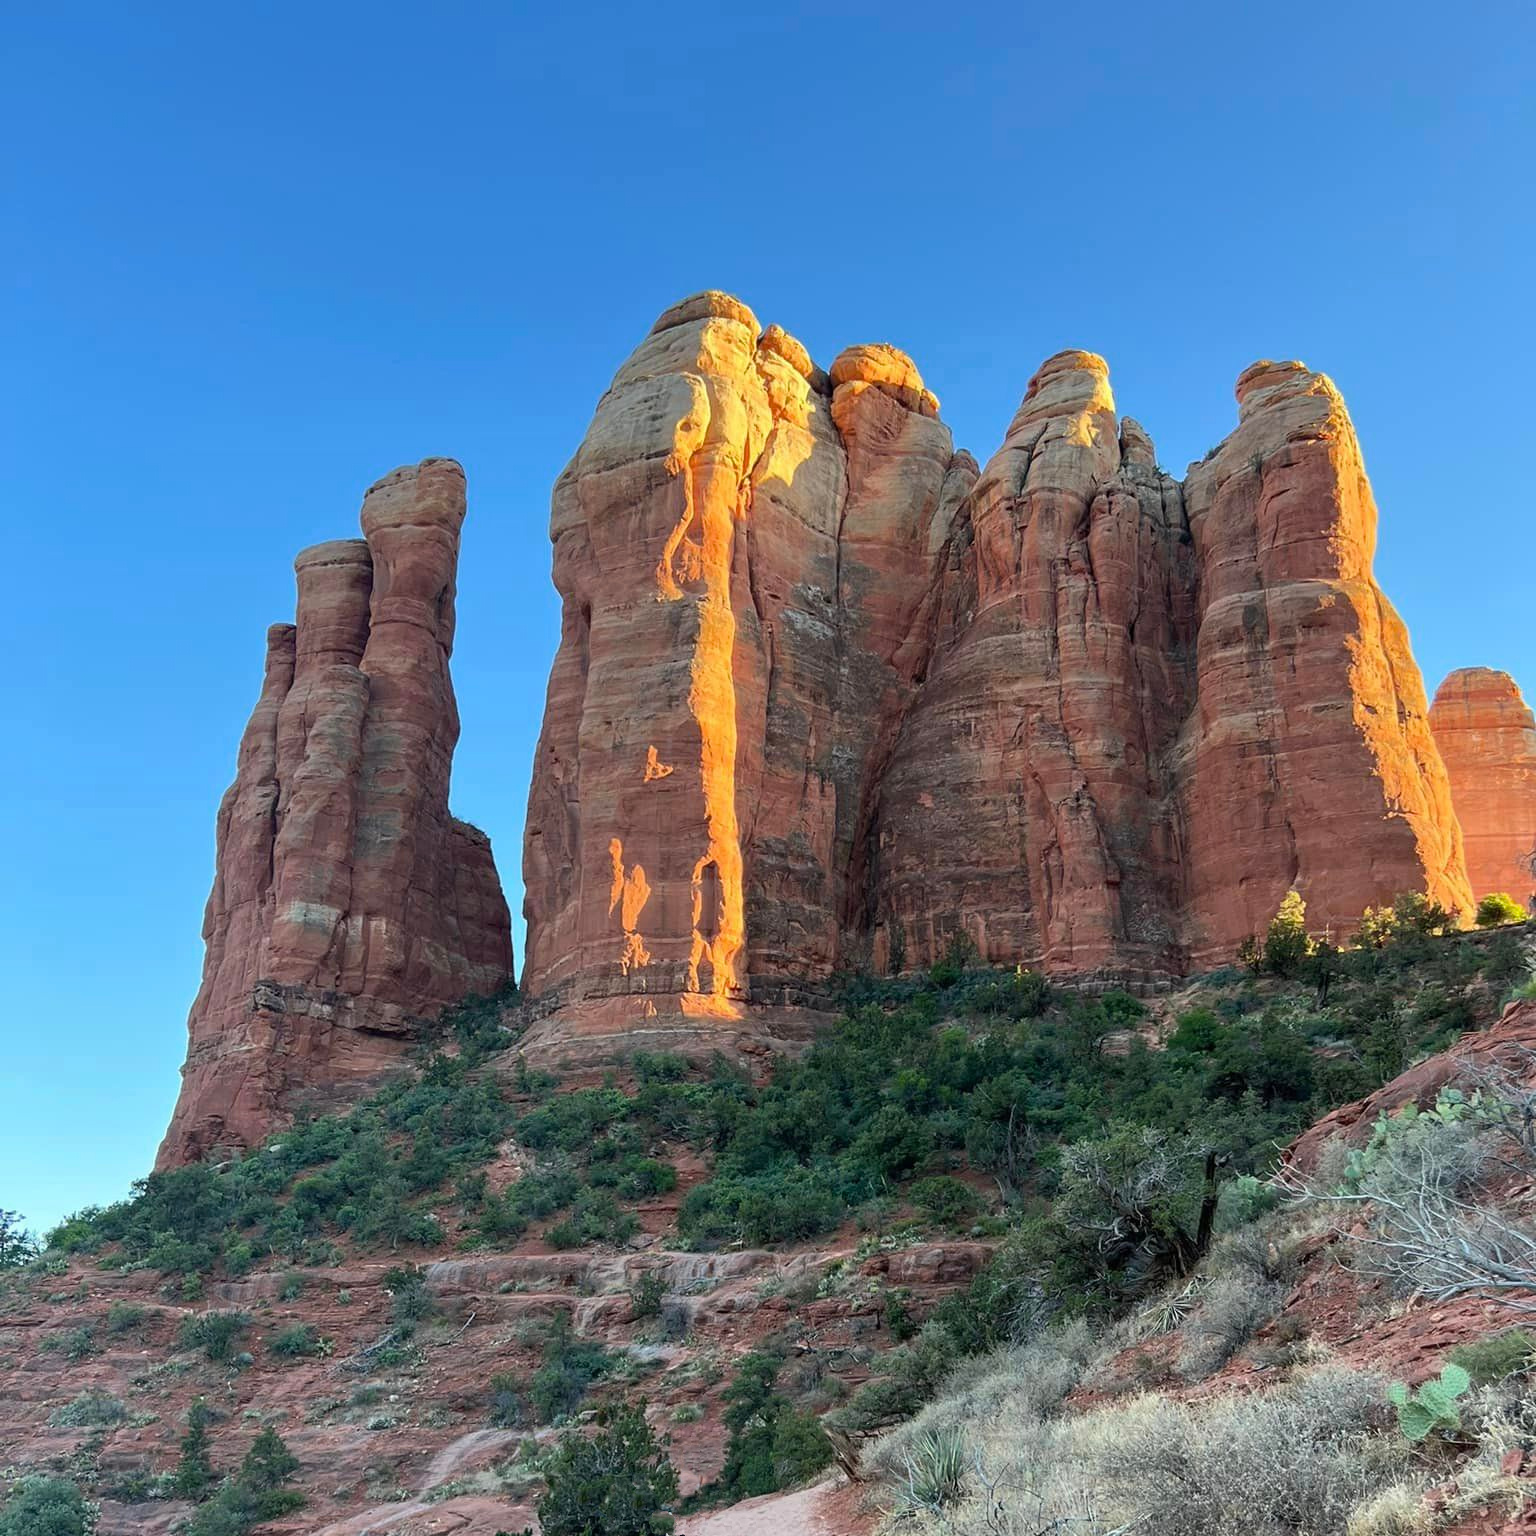 Cathedral Rock at Sedona. beginner's guide to Sedona